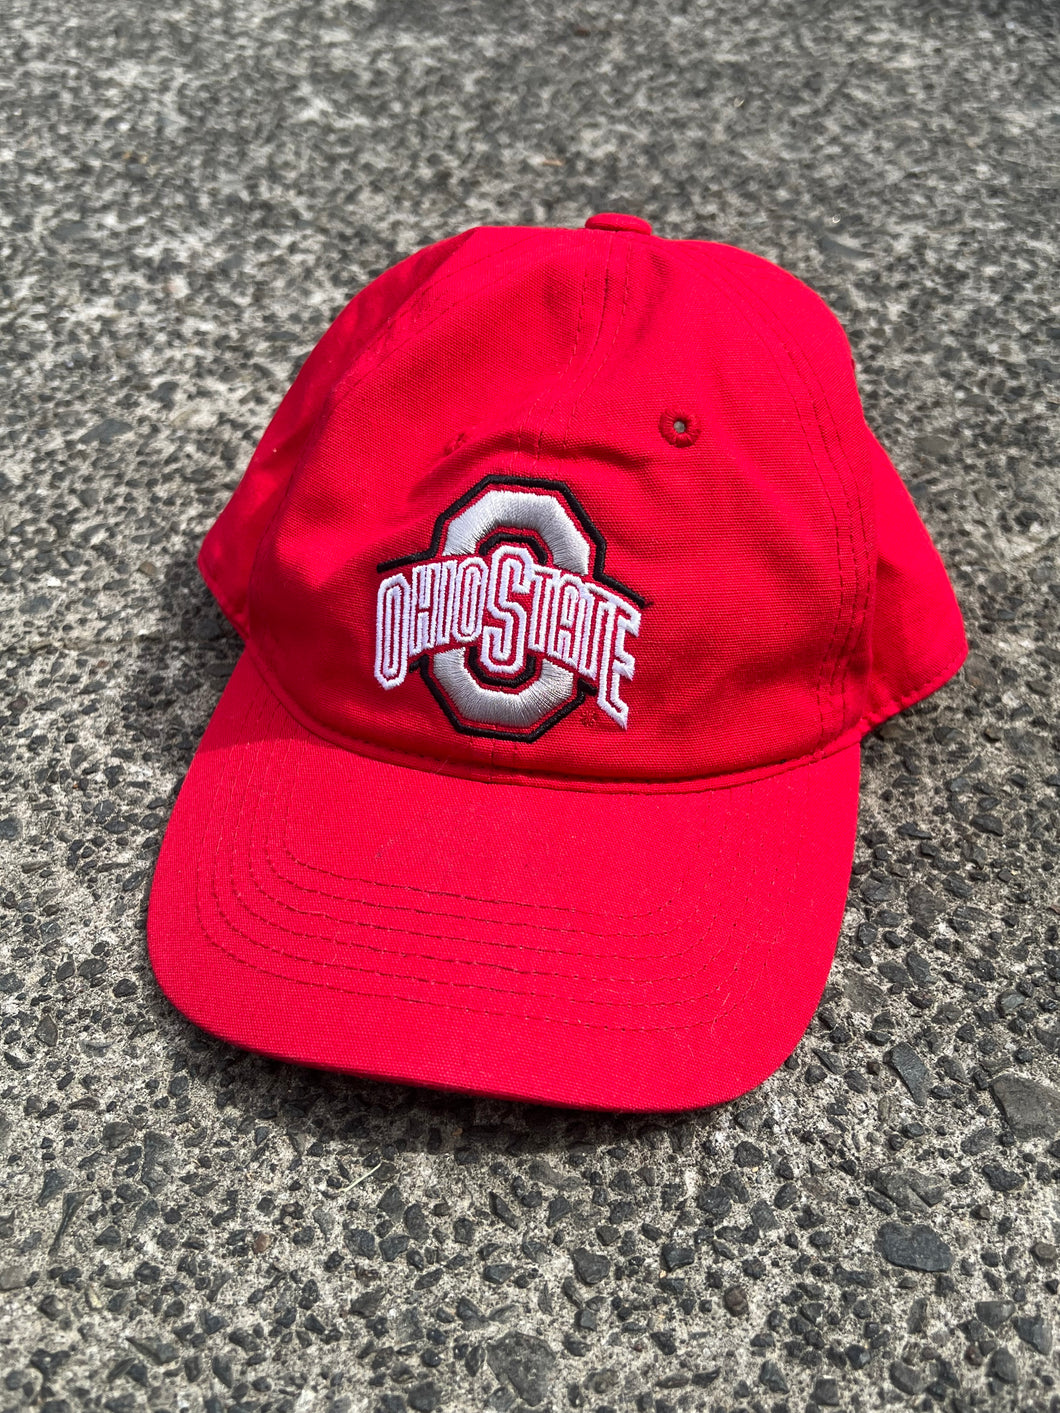 NCAA - OHIO STATE DAD HAT SNAPBACK - ONE SIZE FITS ALL OSFA